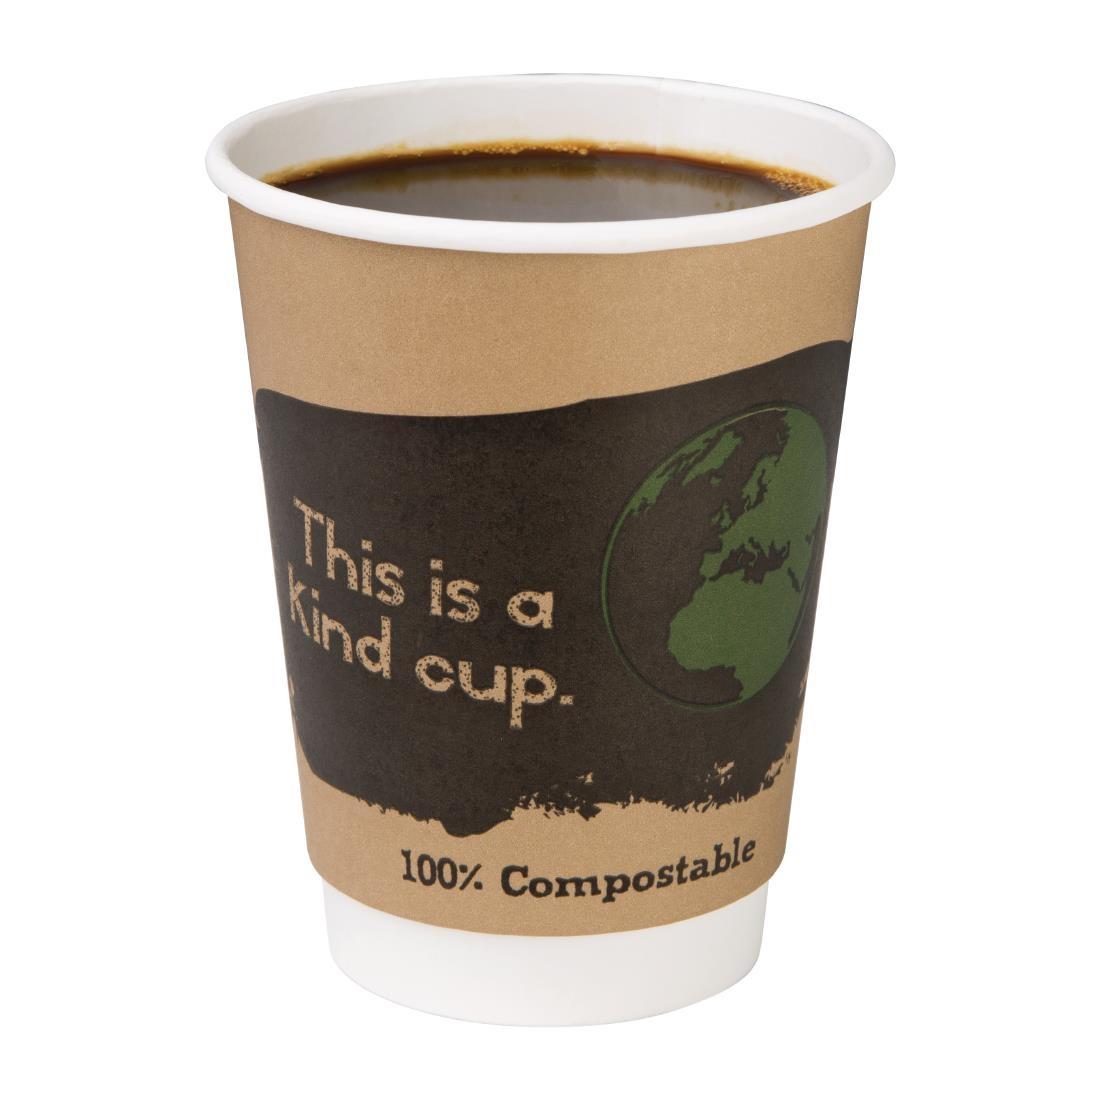 Fiesta Compostable Coffee Cups Double Wall 355ml / 12oz (Pack of 500) - DY987  - 3